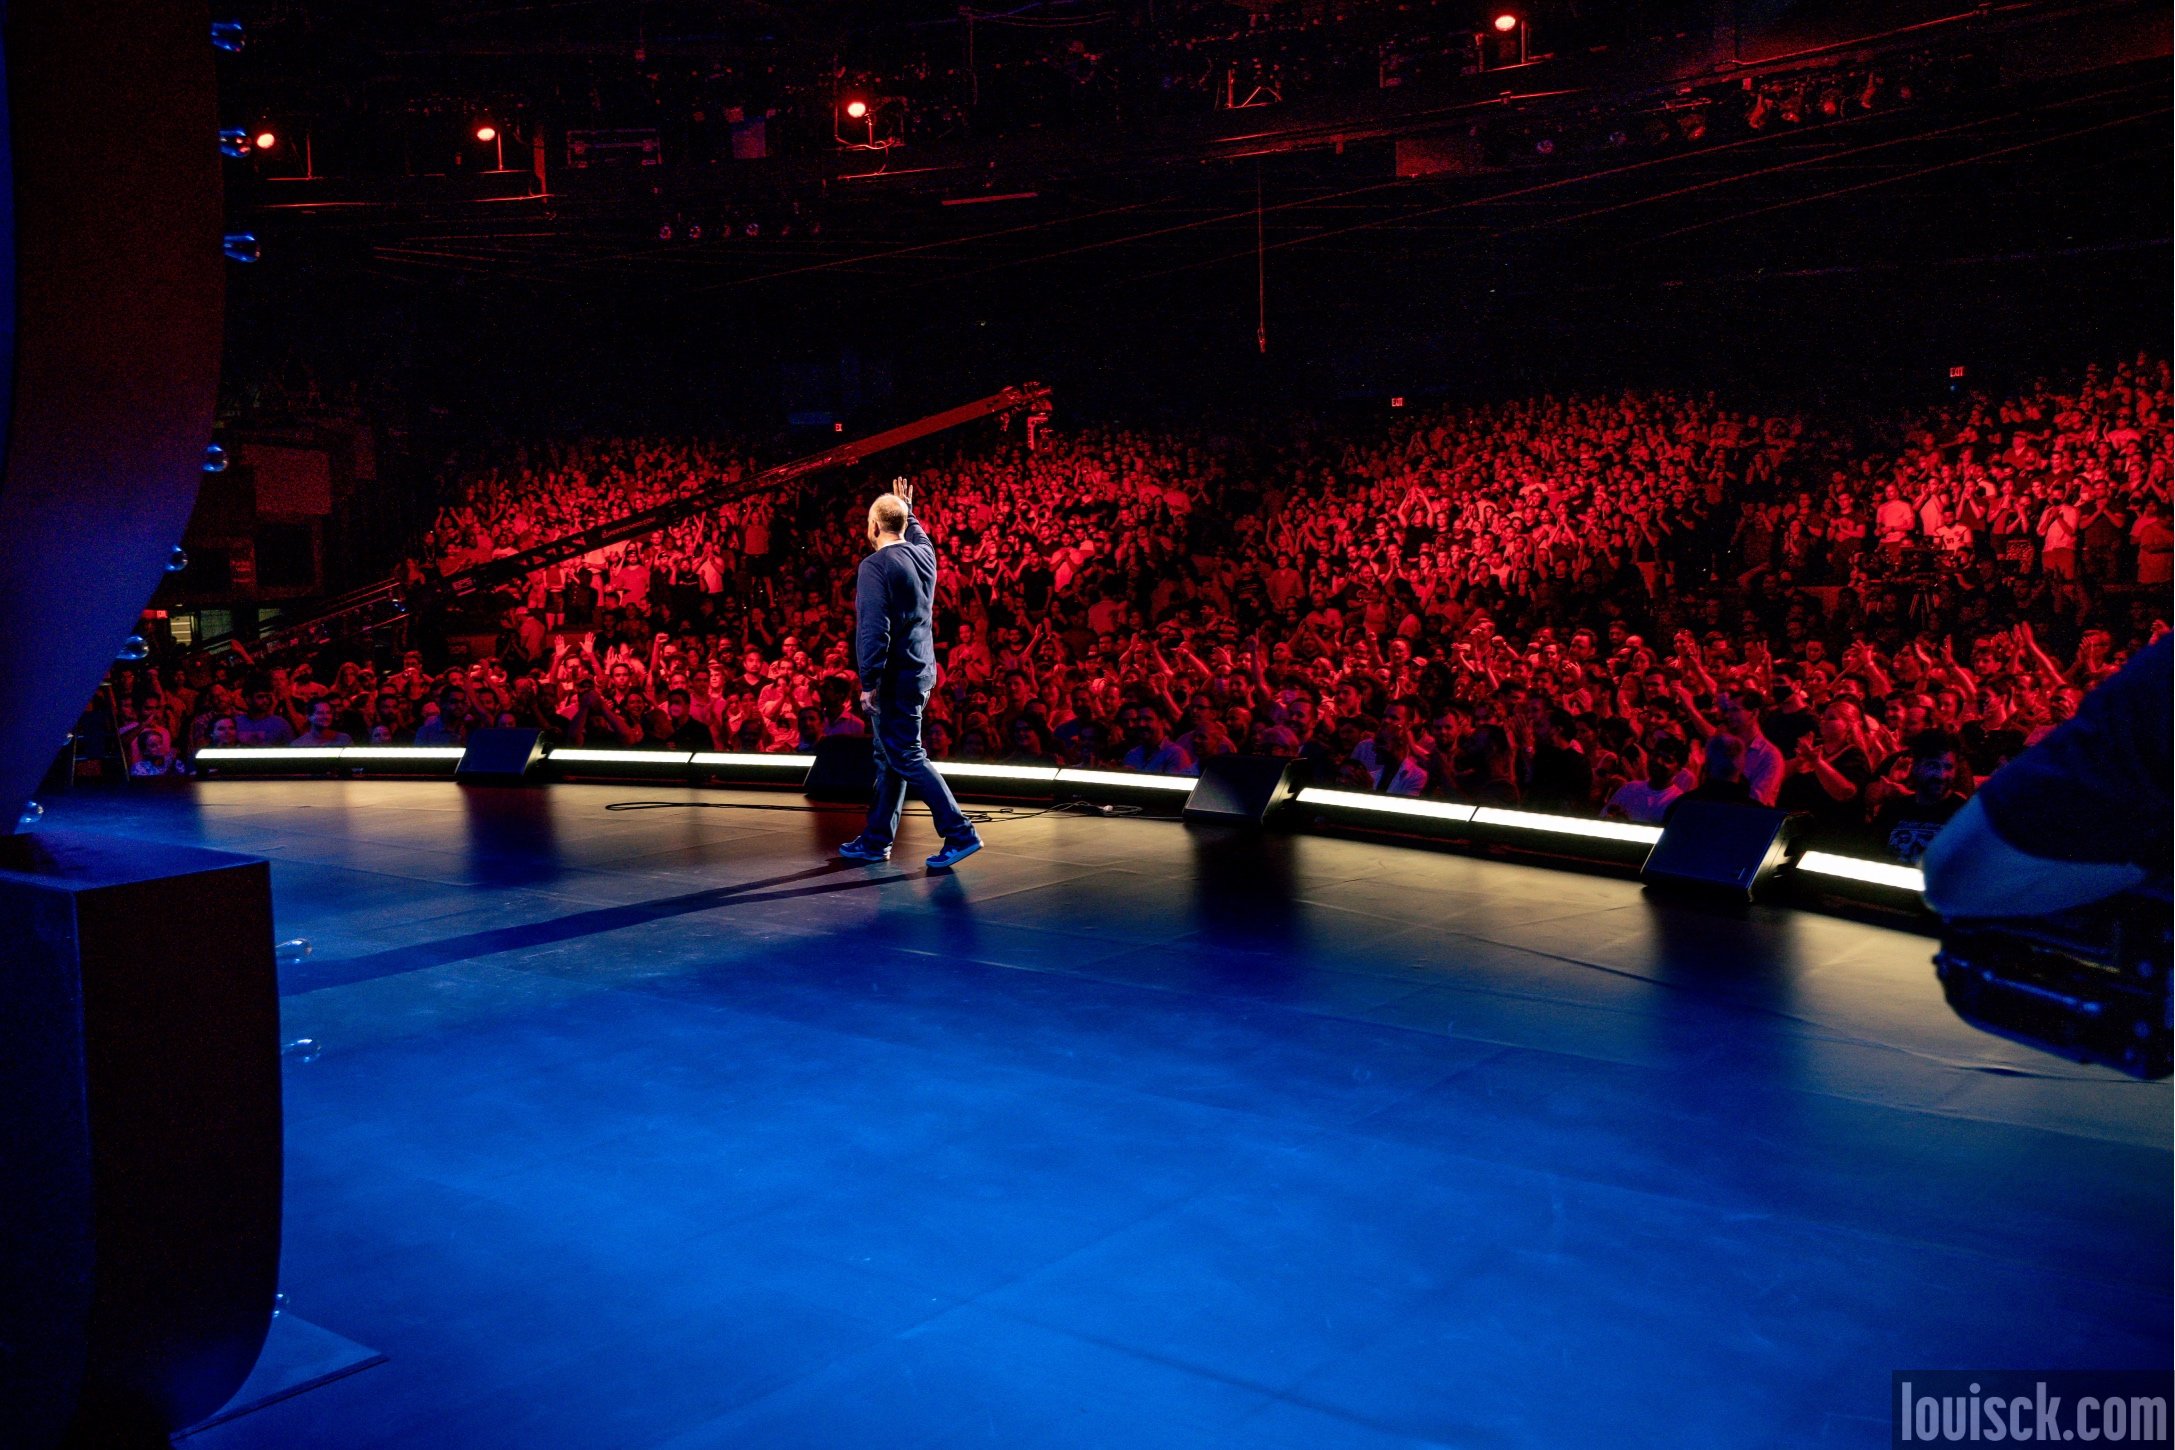 Photo 9 in 'LOUIS C.K. at MADISON SQUARE GARDEN' gallery showcasing lighting design by Mike Baldassari of Mike-O-Matic Industries LLC